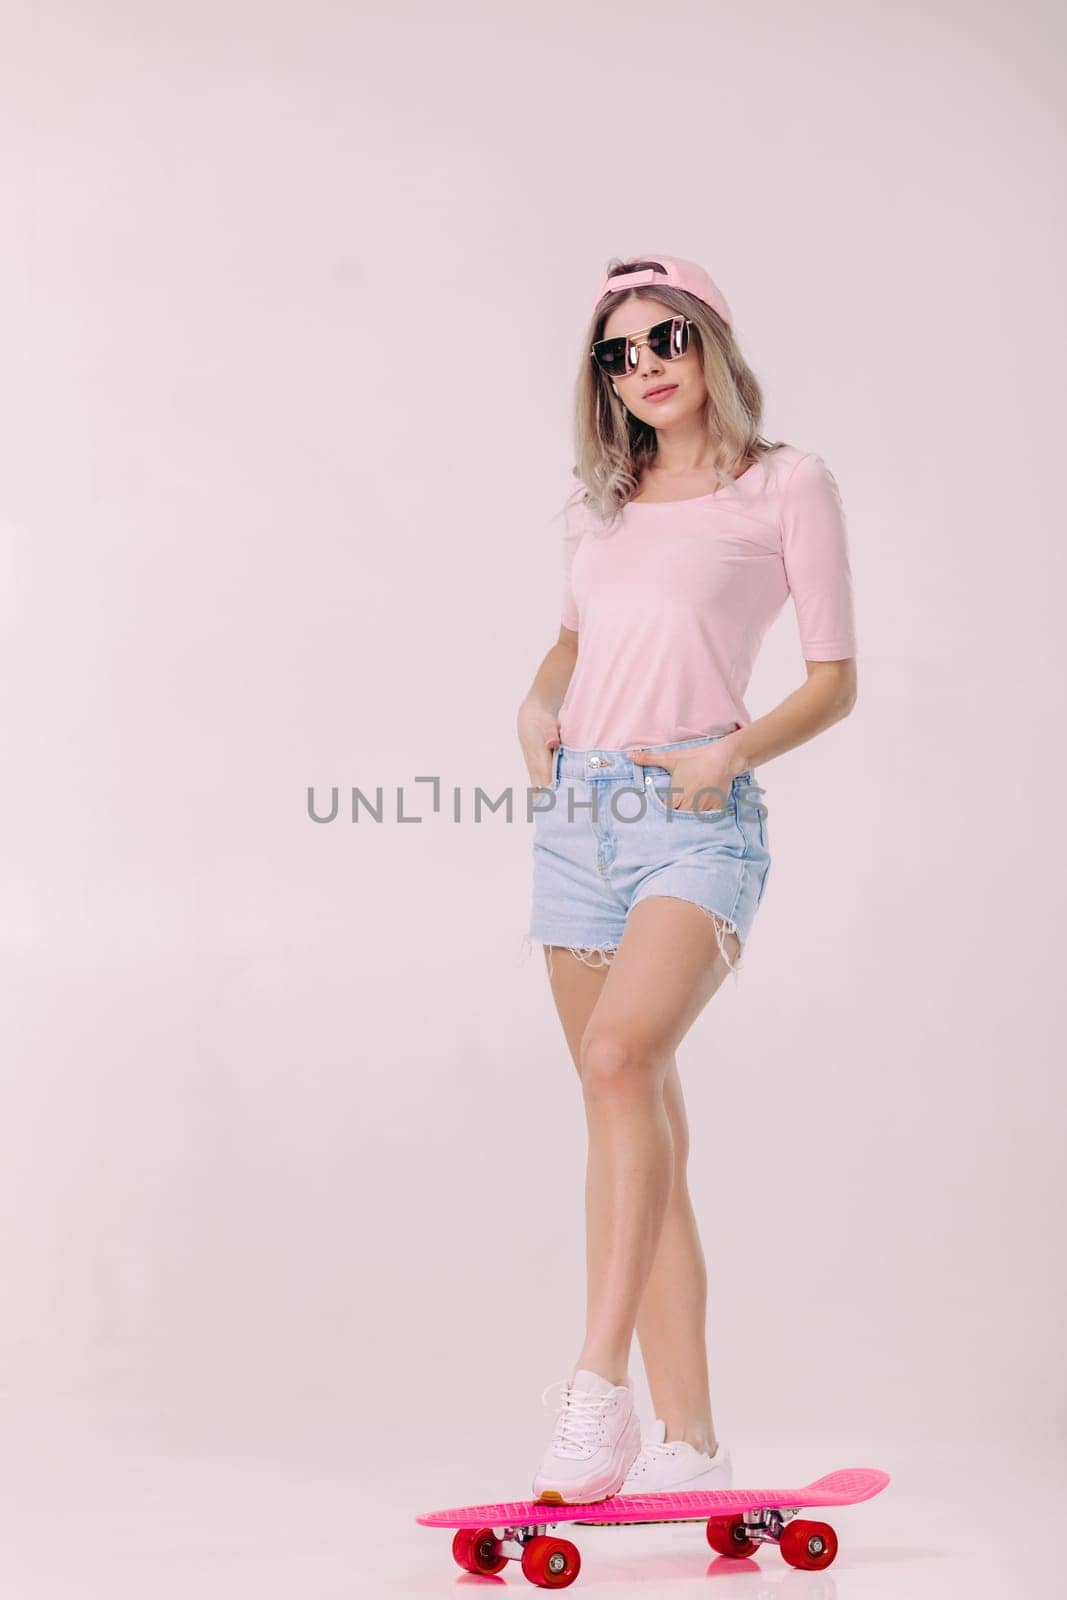 beautiful woman in sunglasses, pink t-shirt and cap with pink skateboard